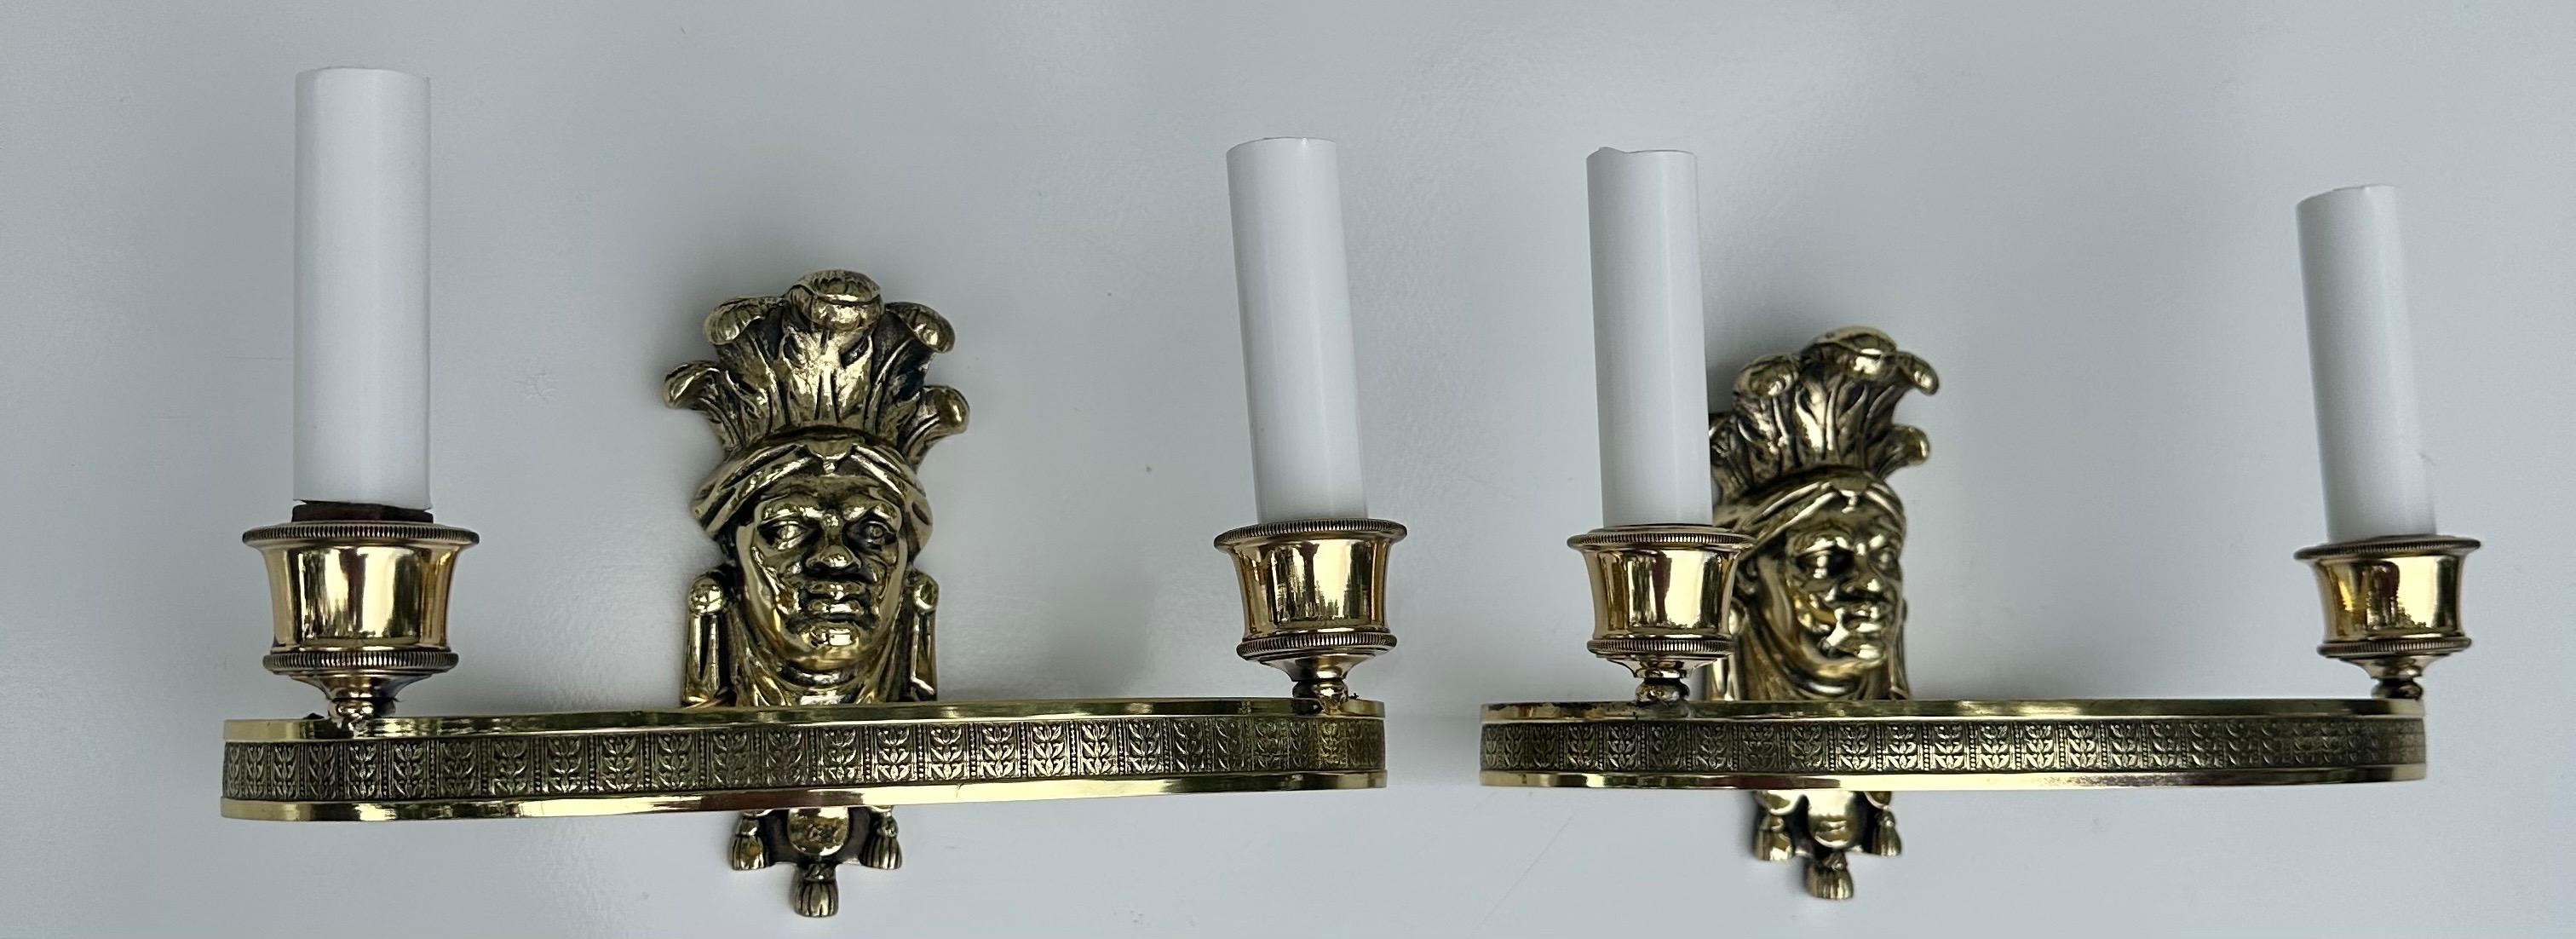 Pair of French Maison Bagues Bronze Sconces For Sale 7